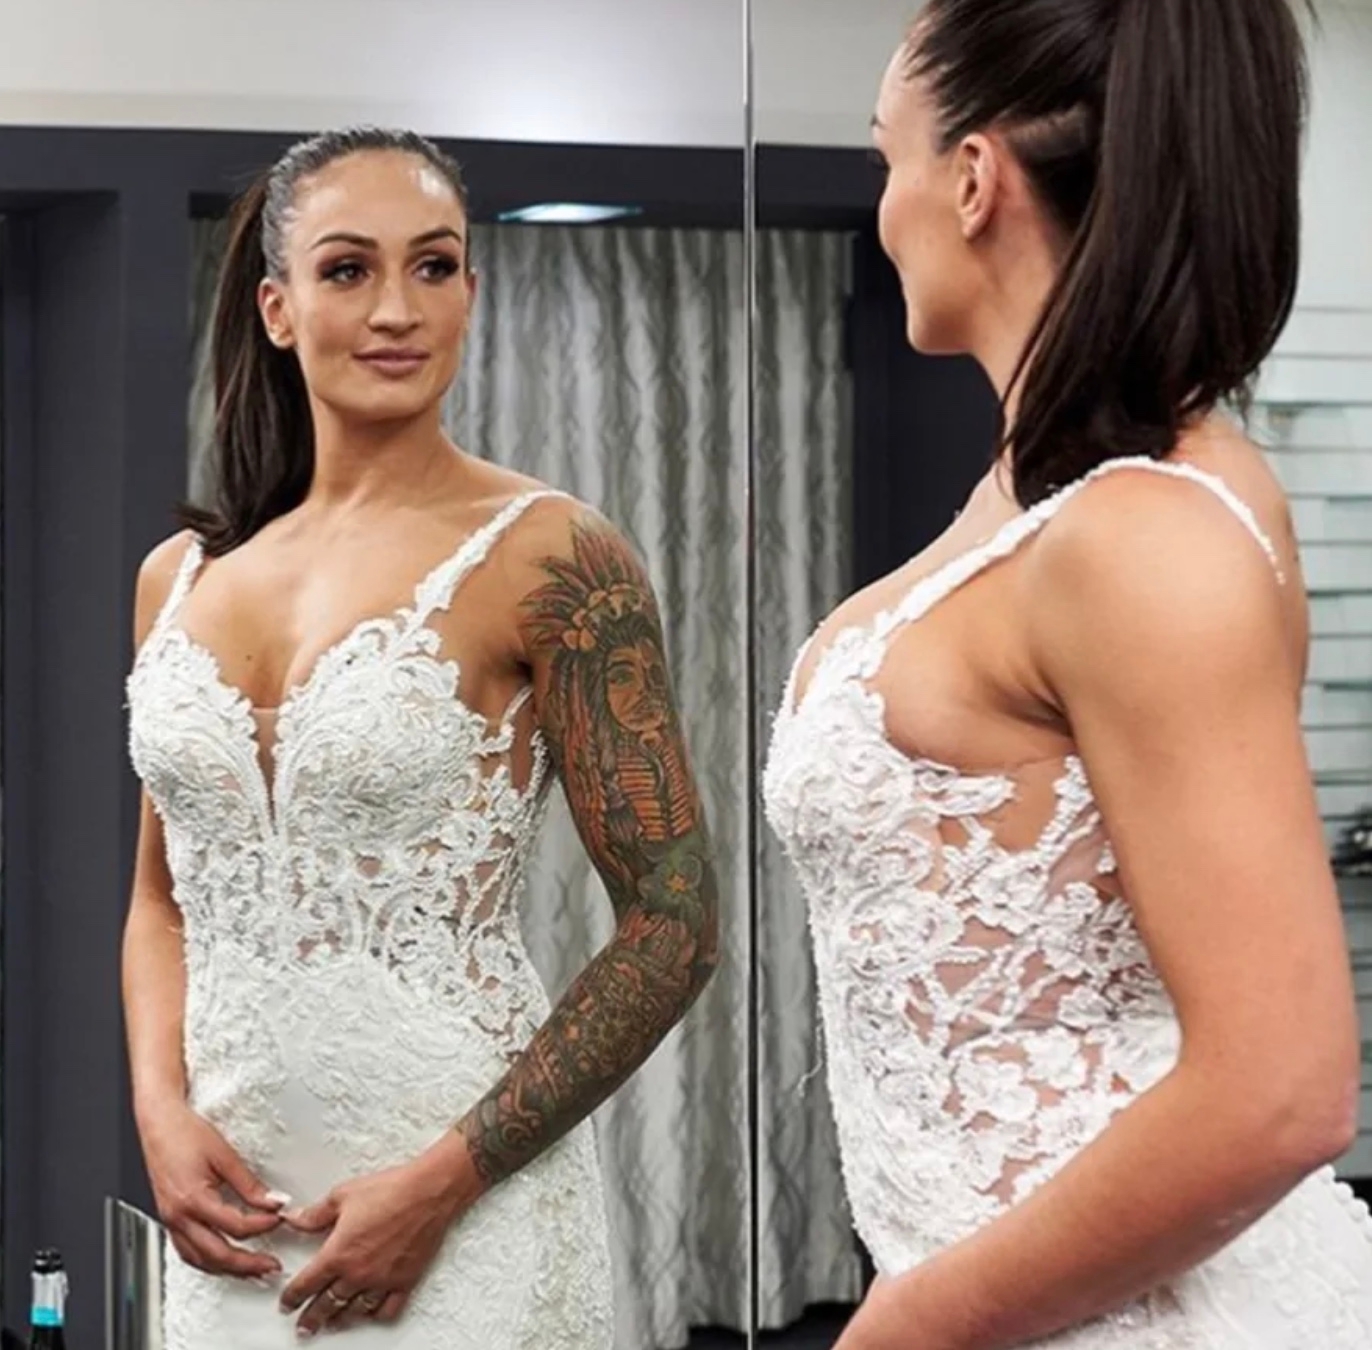 Hayley Vernon, "Married At First Sight" Star, Signs Deal With Brazzers